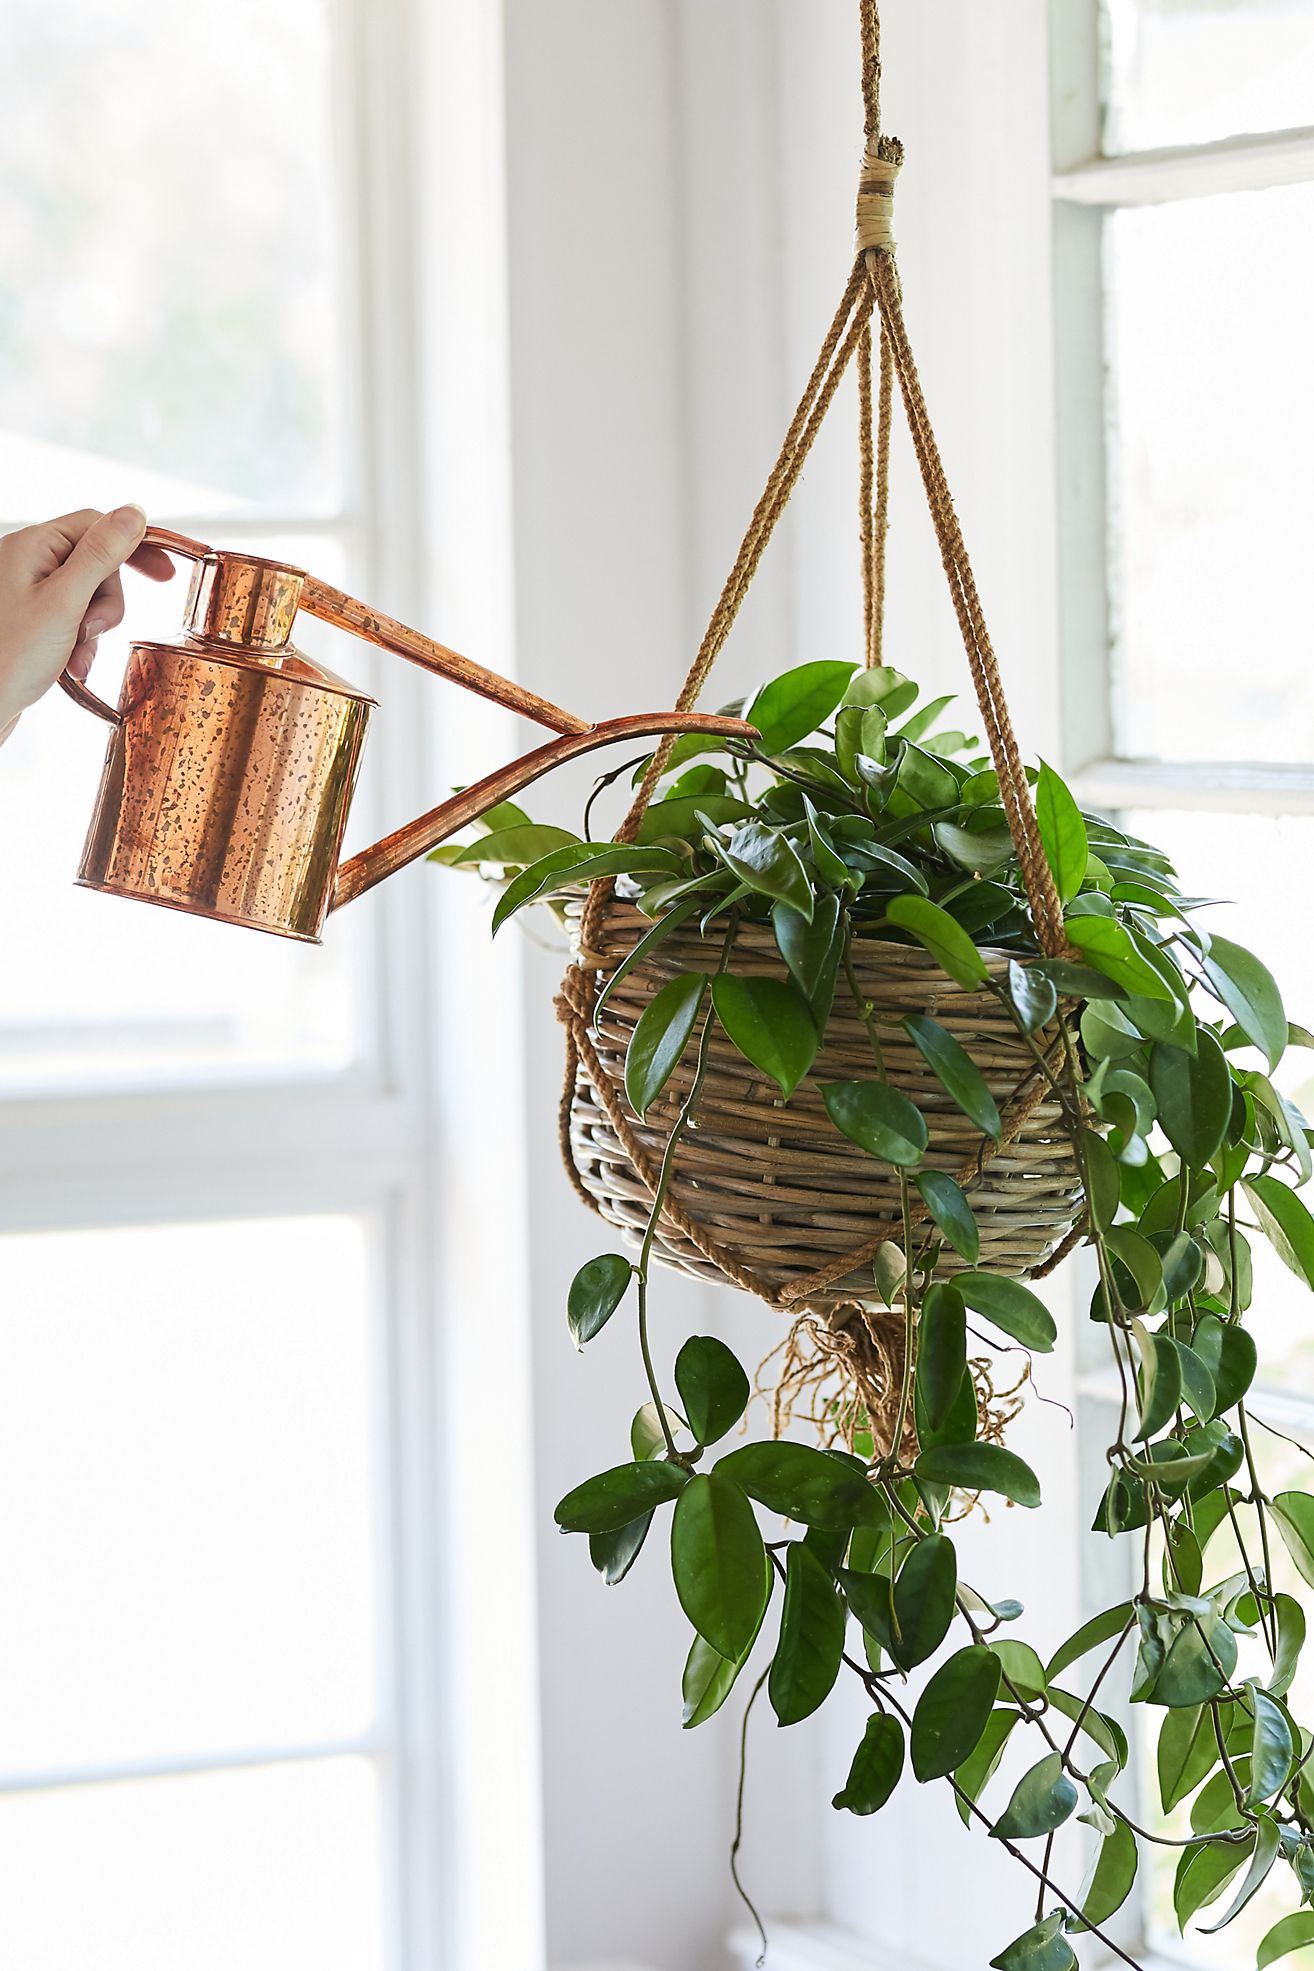 Bring in Texture with a Rattan Hanging Basket